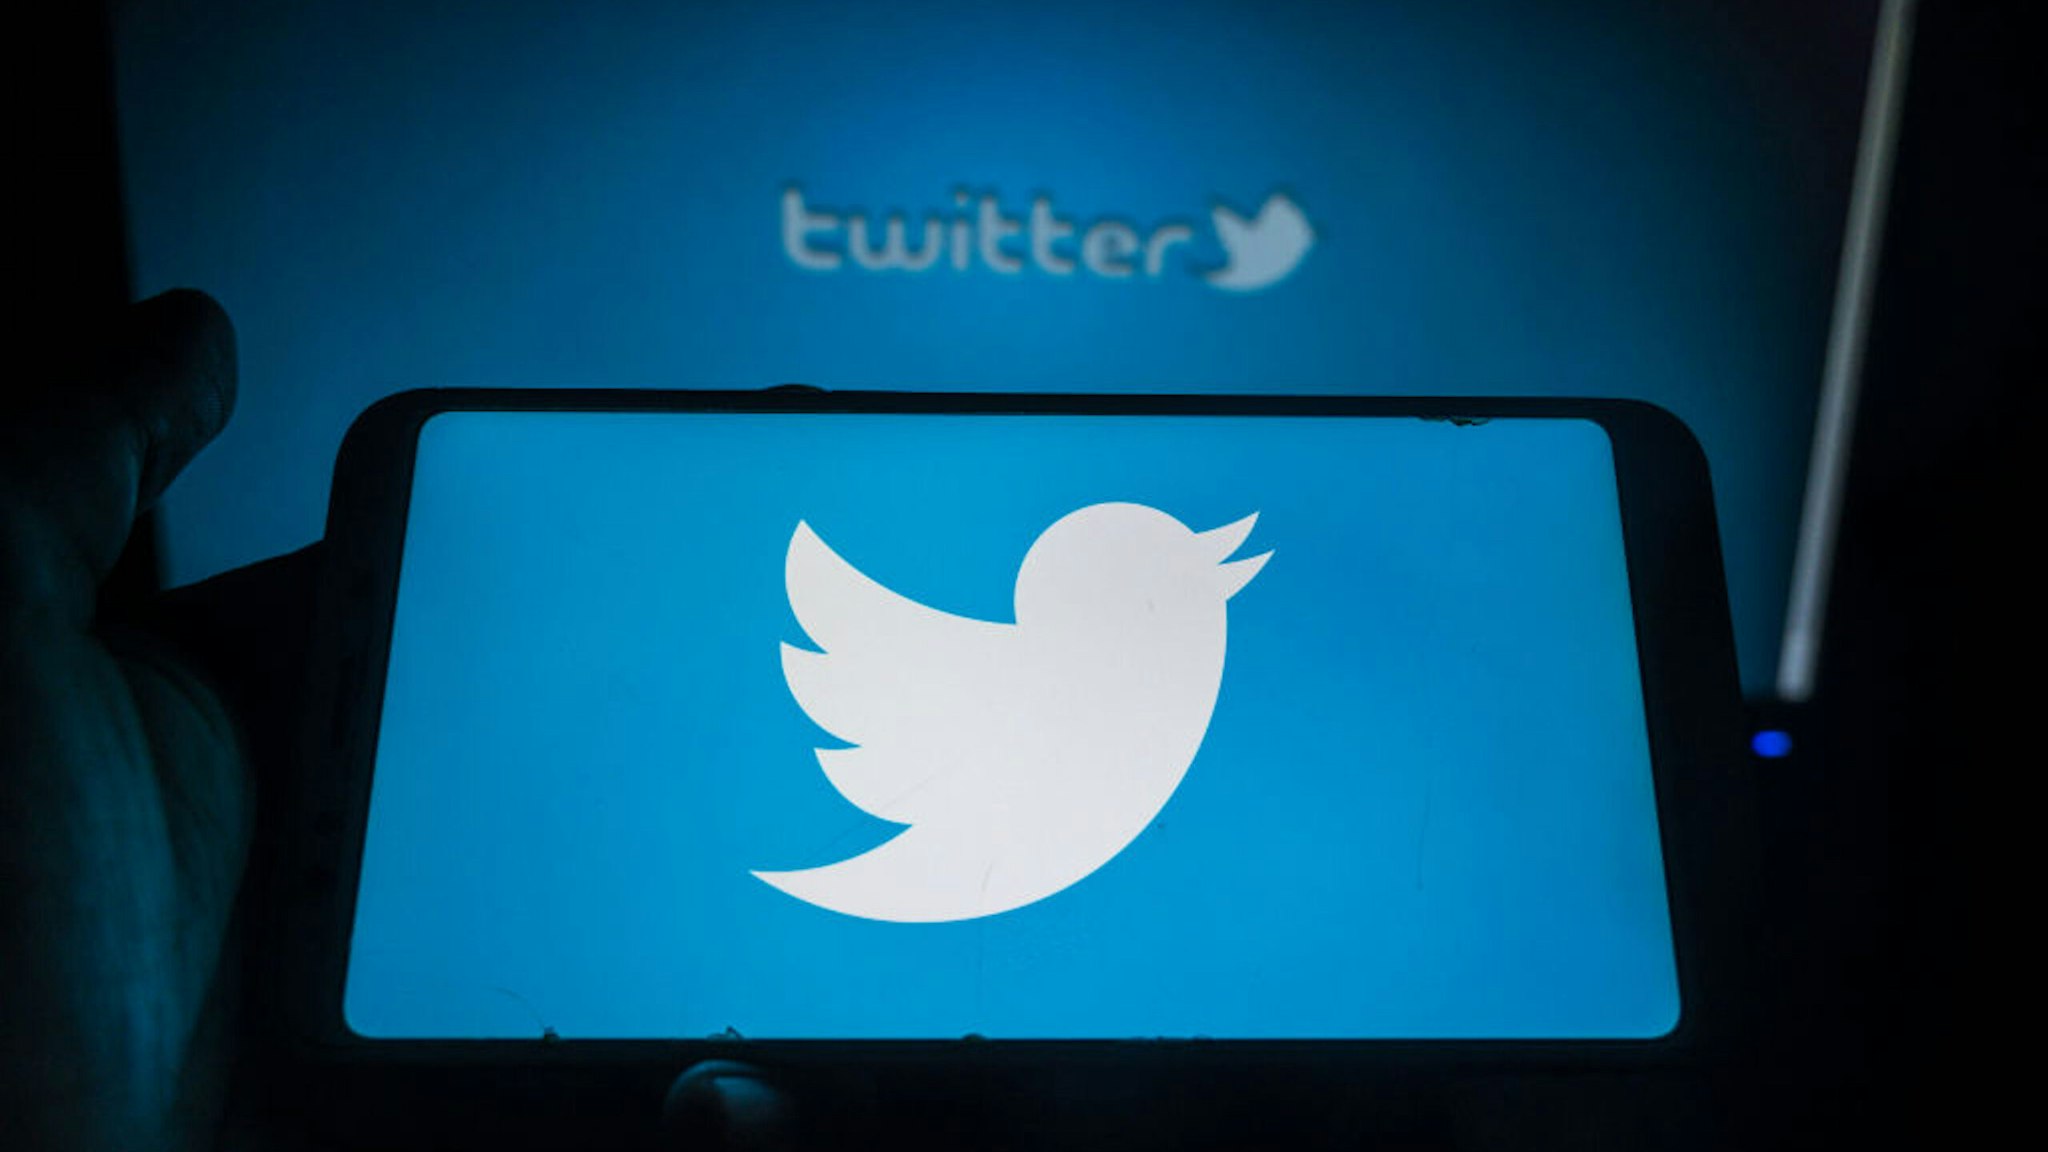 Twitter logo displayed on a phone screen in Tehatta, Nadia, West Bengal, India on June 16, 2020. Twitter is launching two new features: The ability to save a tweet as a draft, as well as the ability to schedule a tweet to send at a specific time.